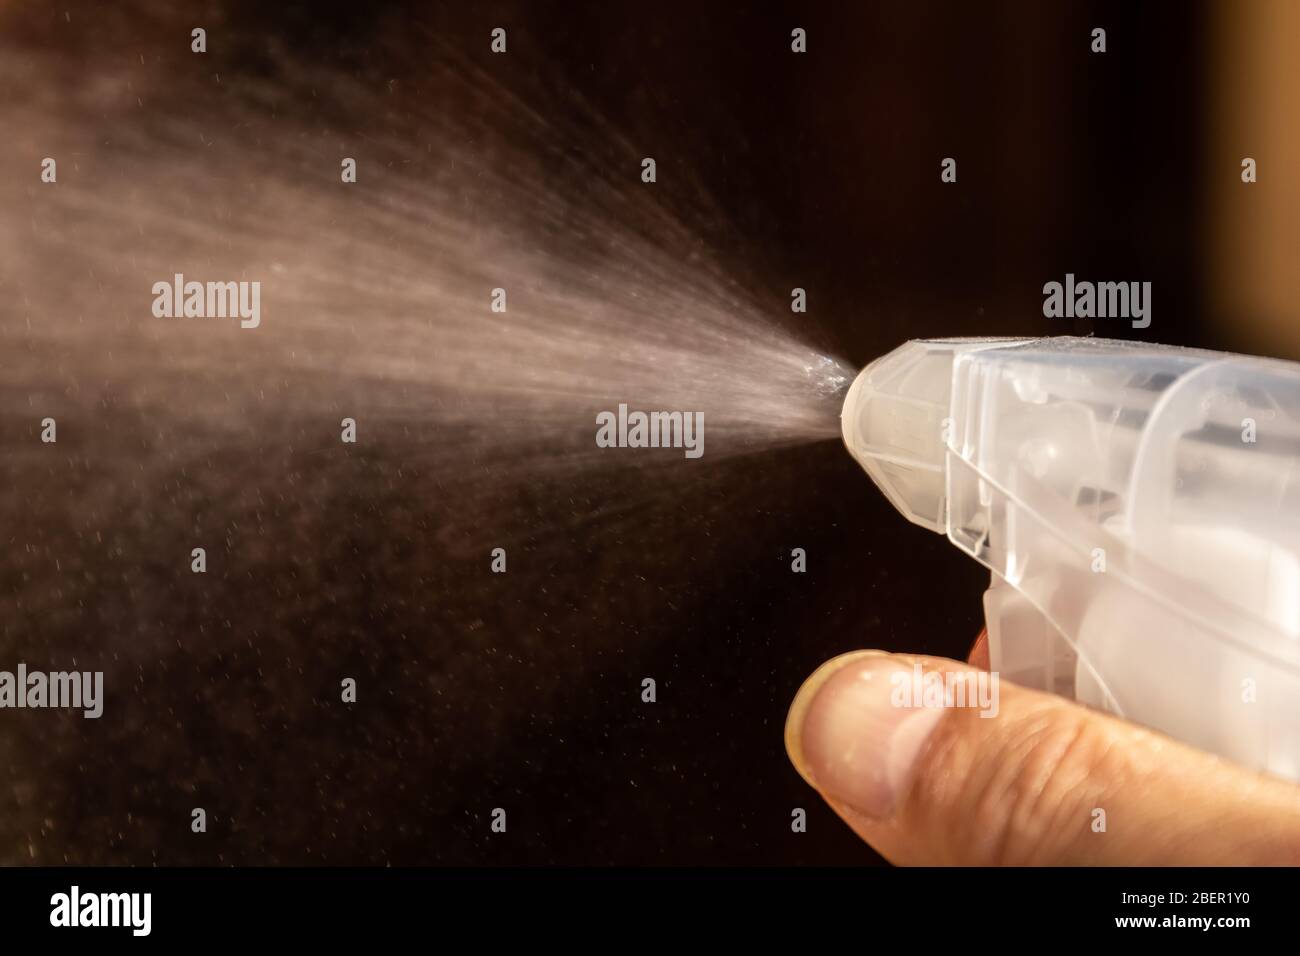 Plastic squirt bottle sprays liquid out of its nozzle Stock Photo